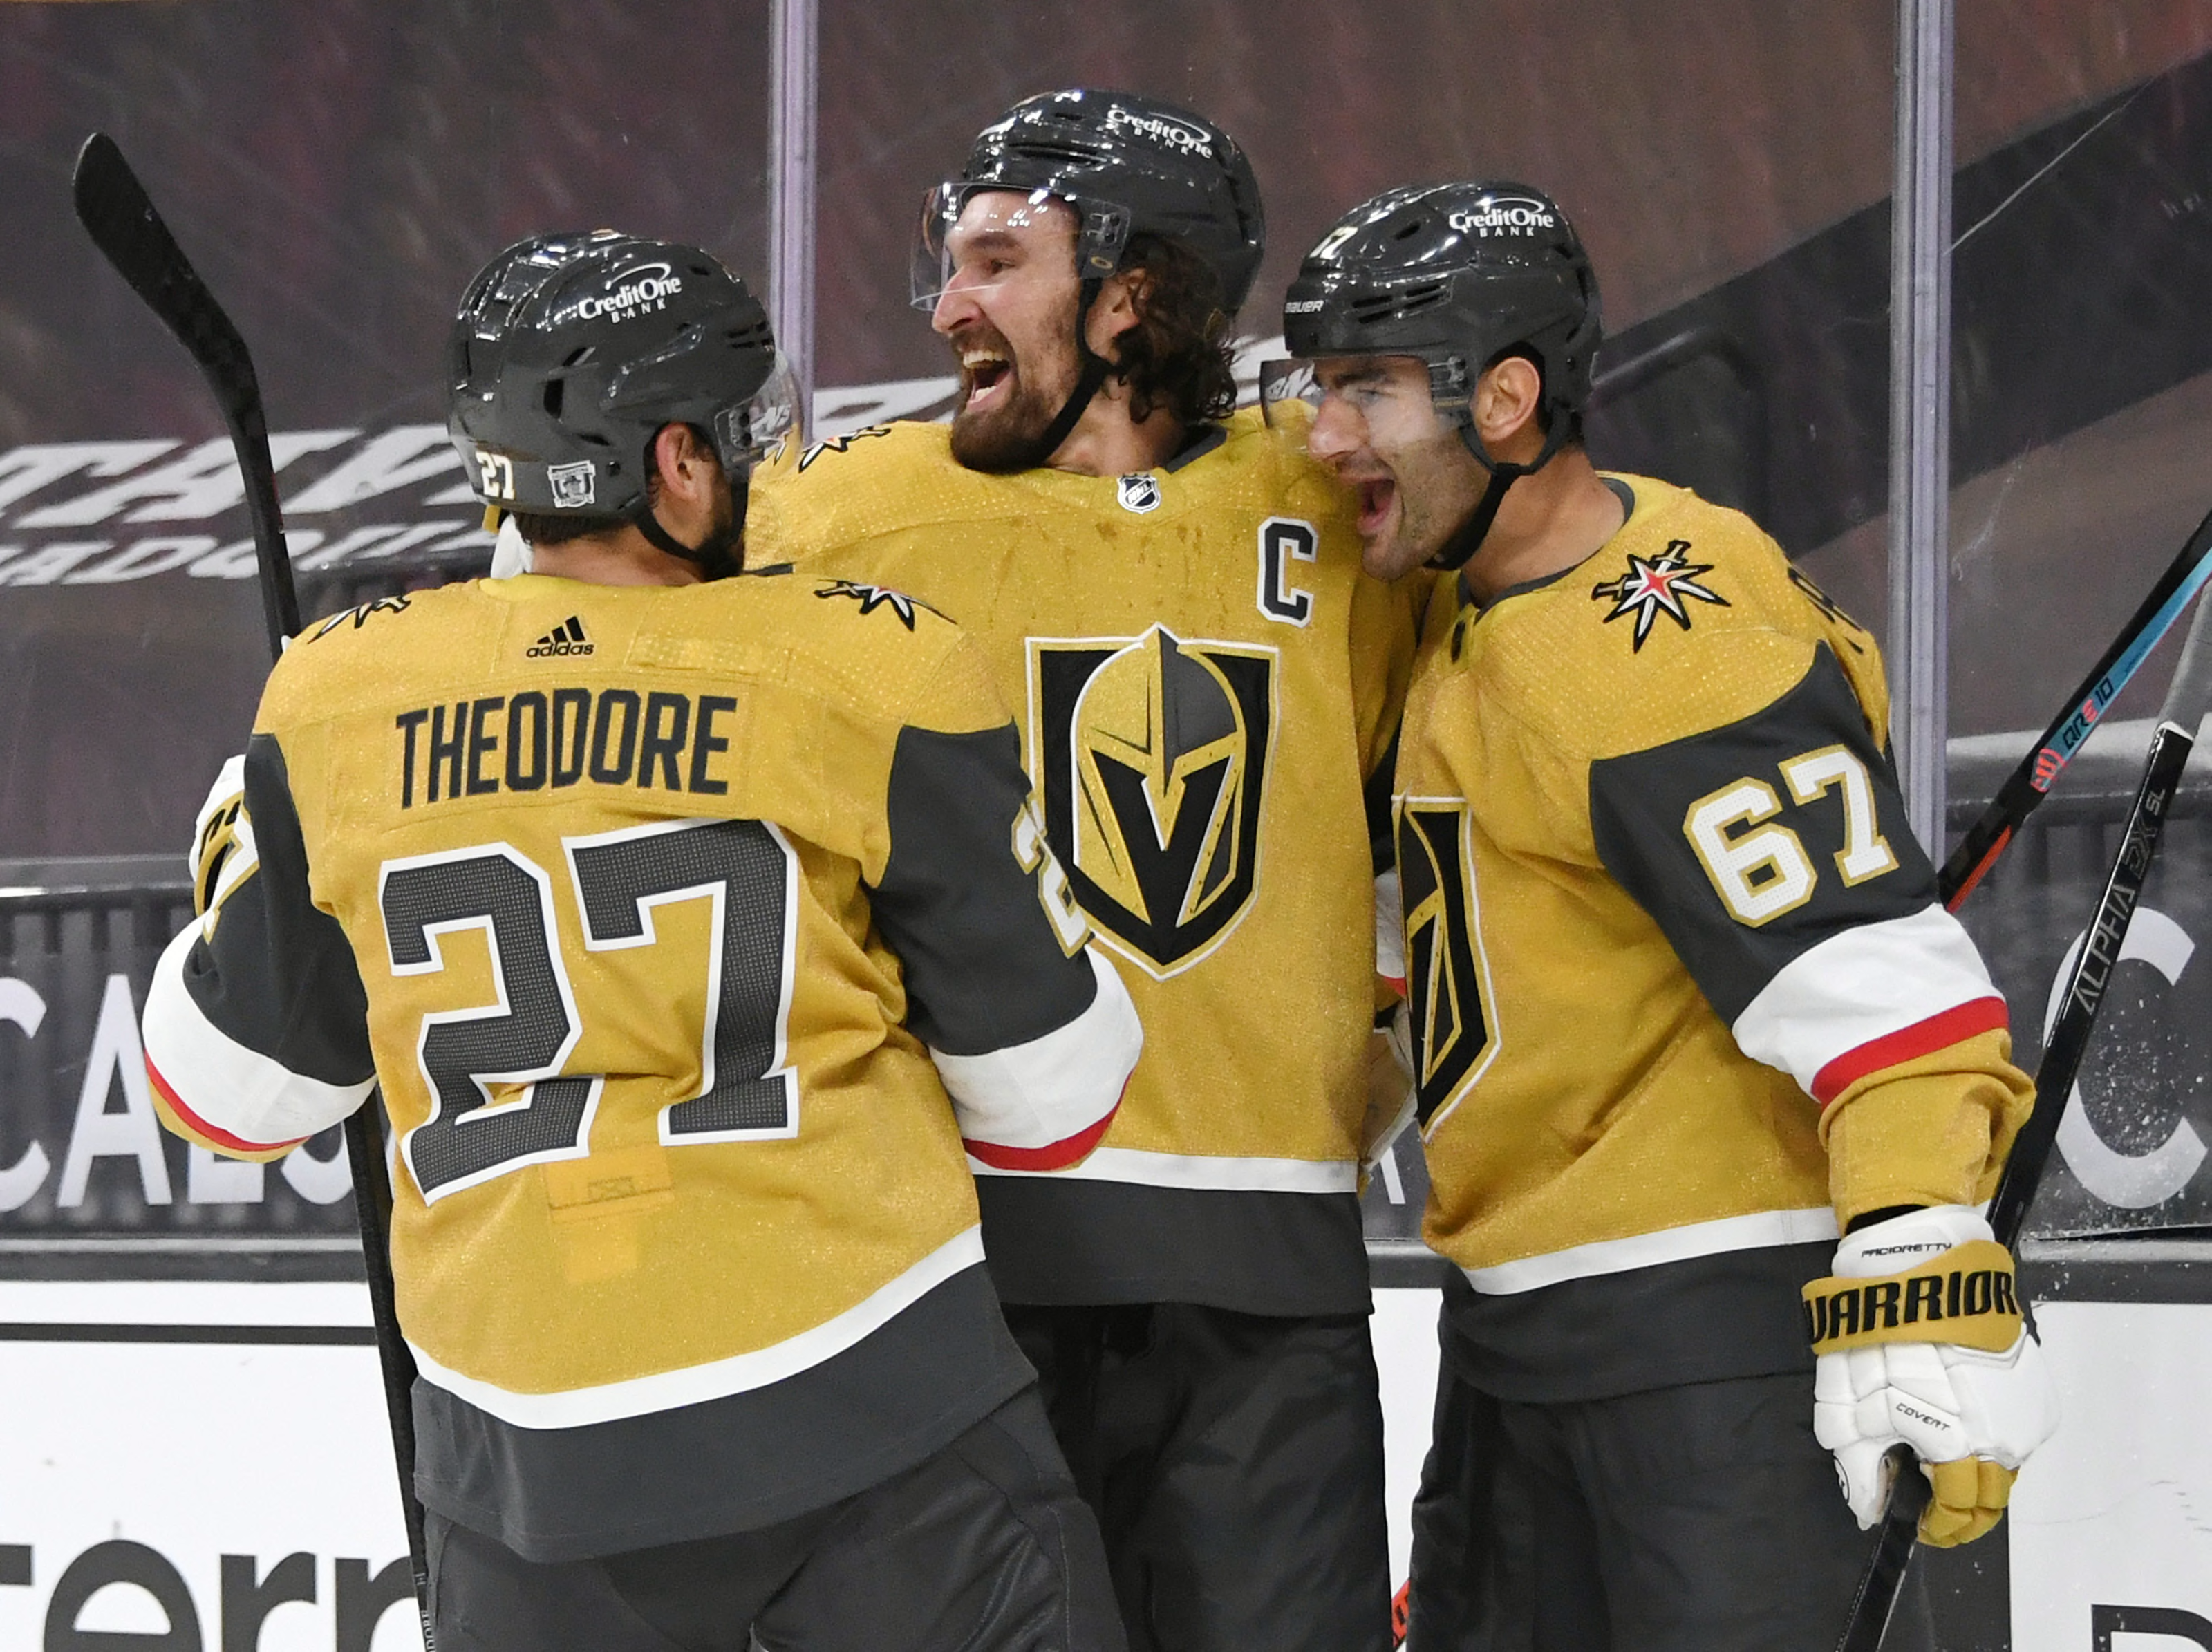 The Vegas Golden Knights' jersey. Adidas unveiled the NHL jerseys